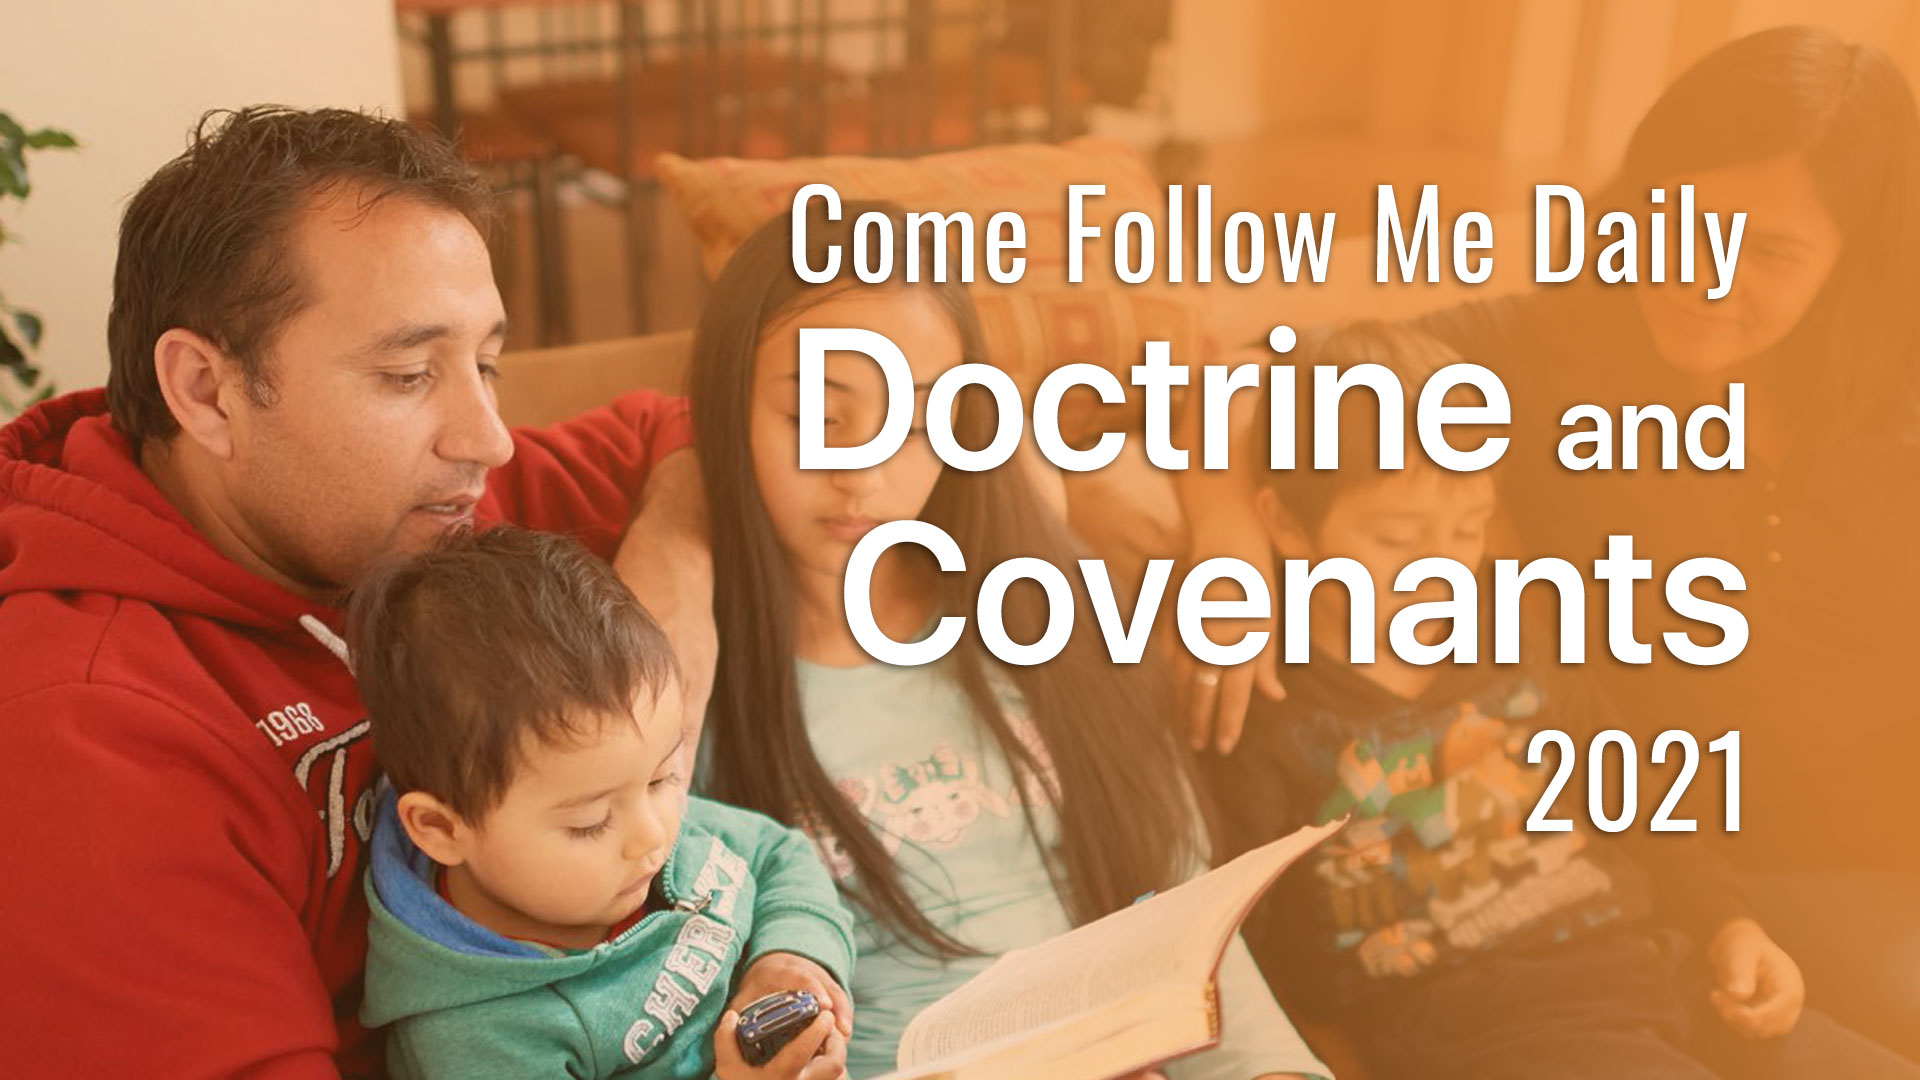 Header Image for Doctrine and Covenants Come Follow Me Reading Plan